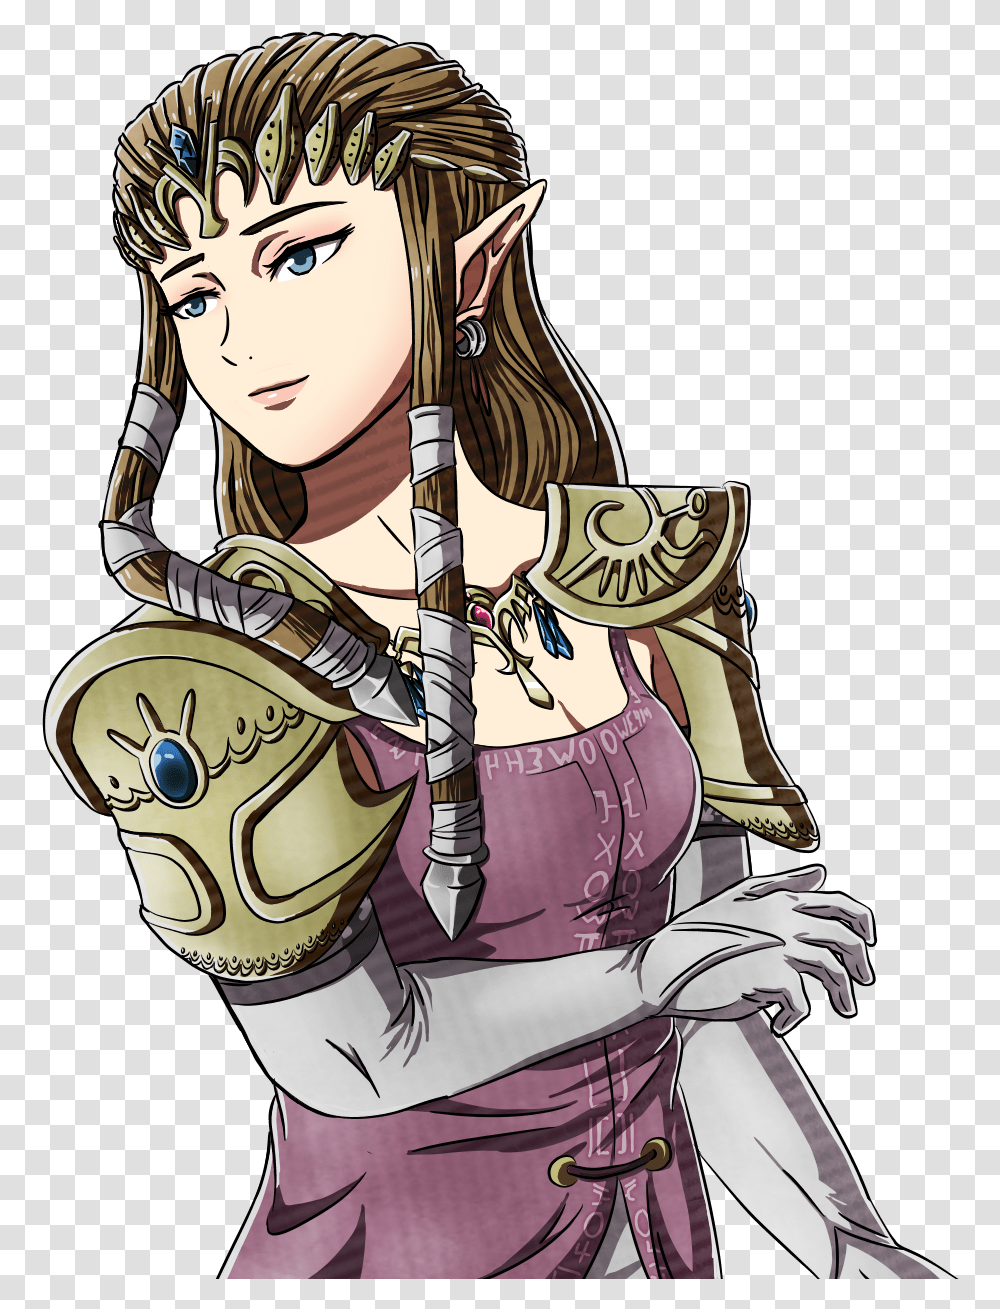 Has This Been Done Yet Princess Zelda Fire Emblem Full Princess Zelda Fire Emblem, Manga, Comics, Book, Person Transparent Png